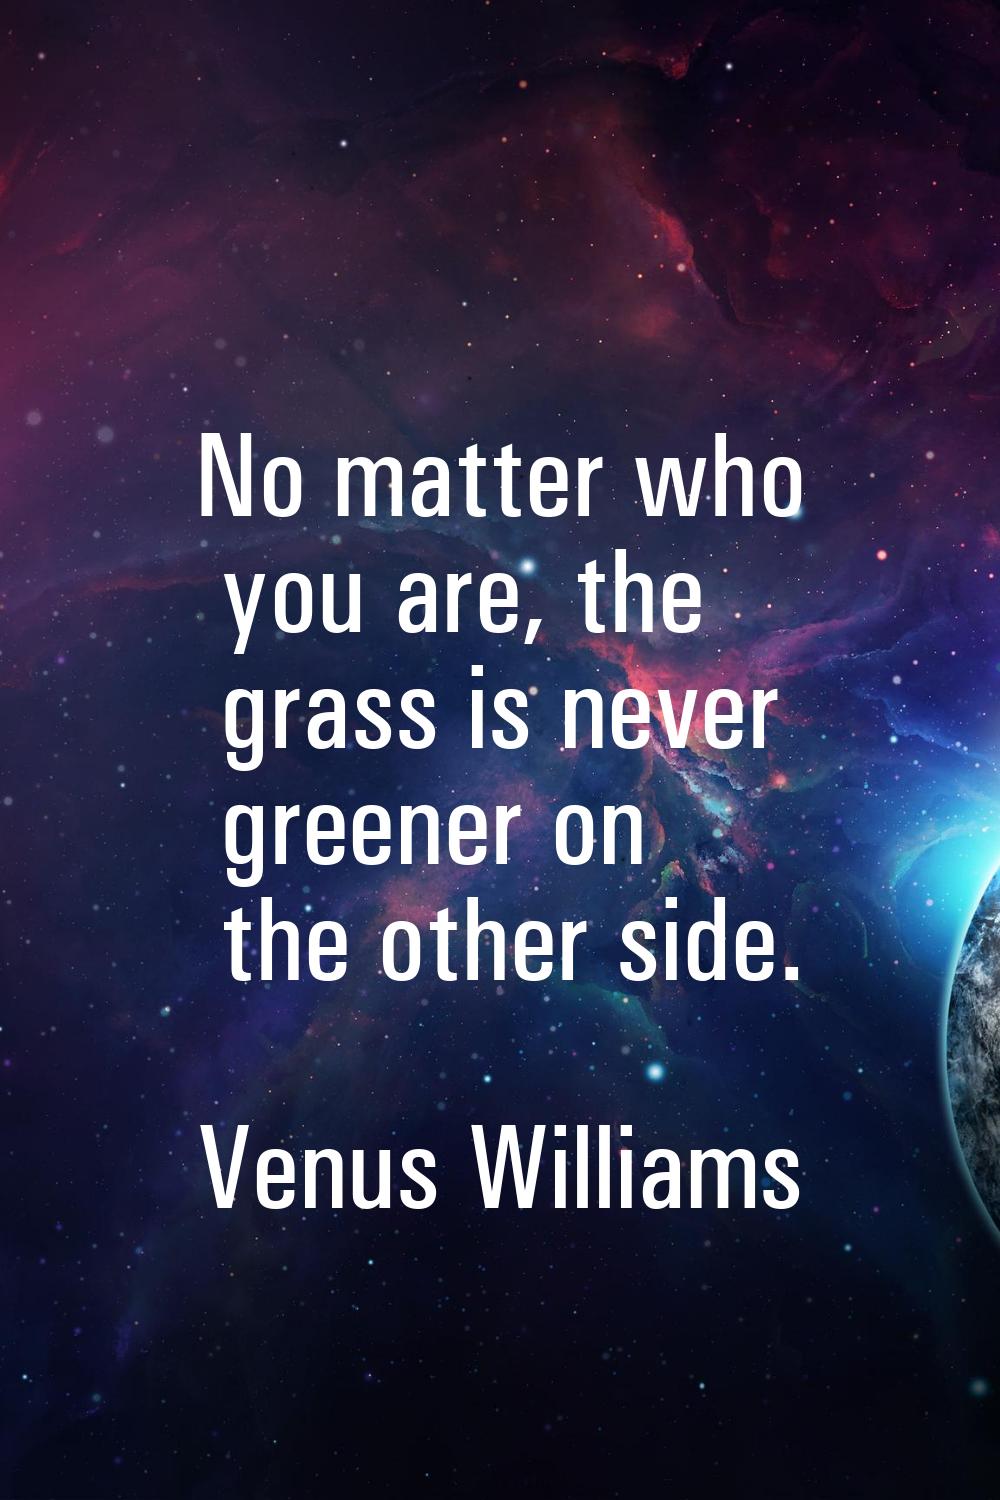 No matter who you are, the grass is never greener on the other side.